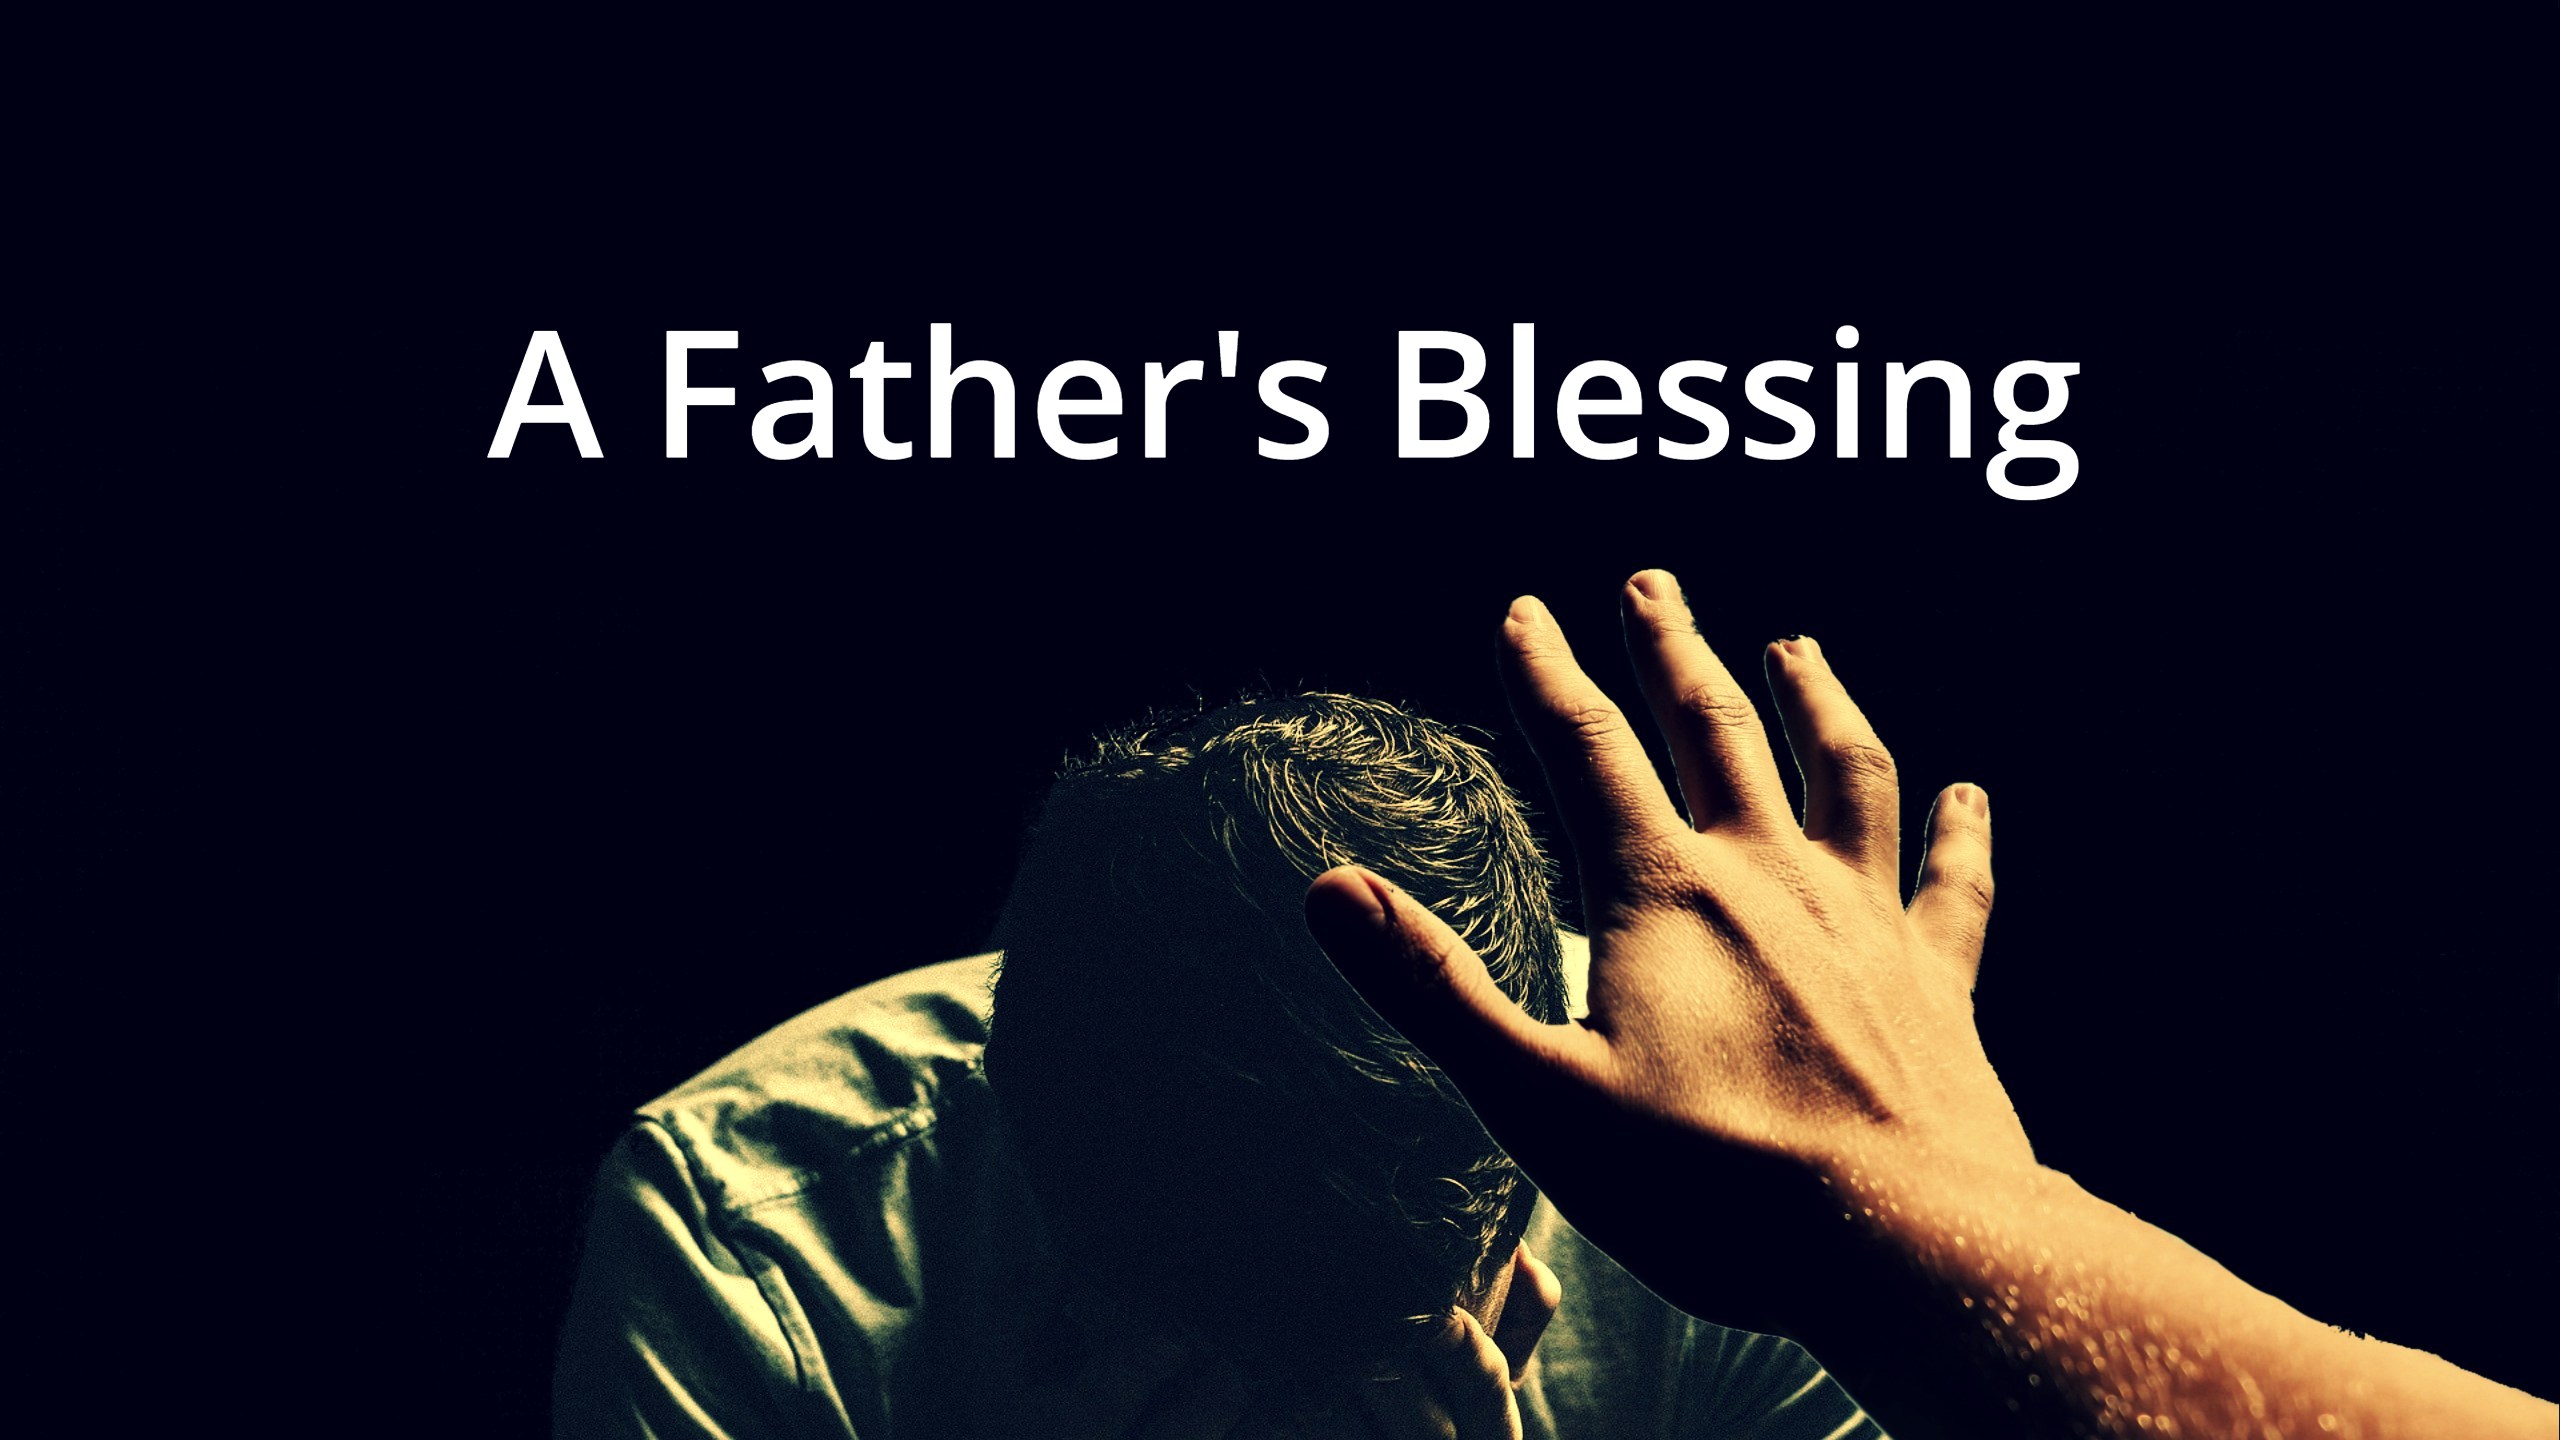 A Father's Blessing